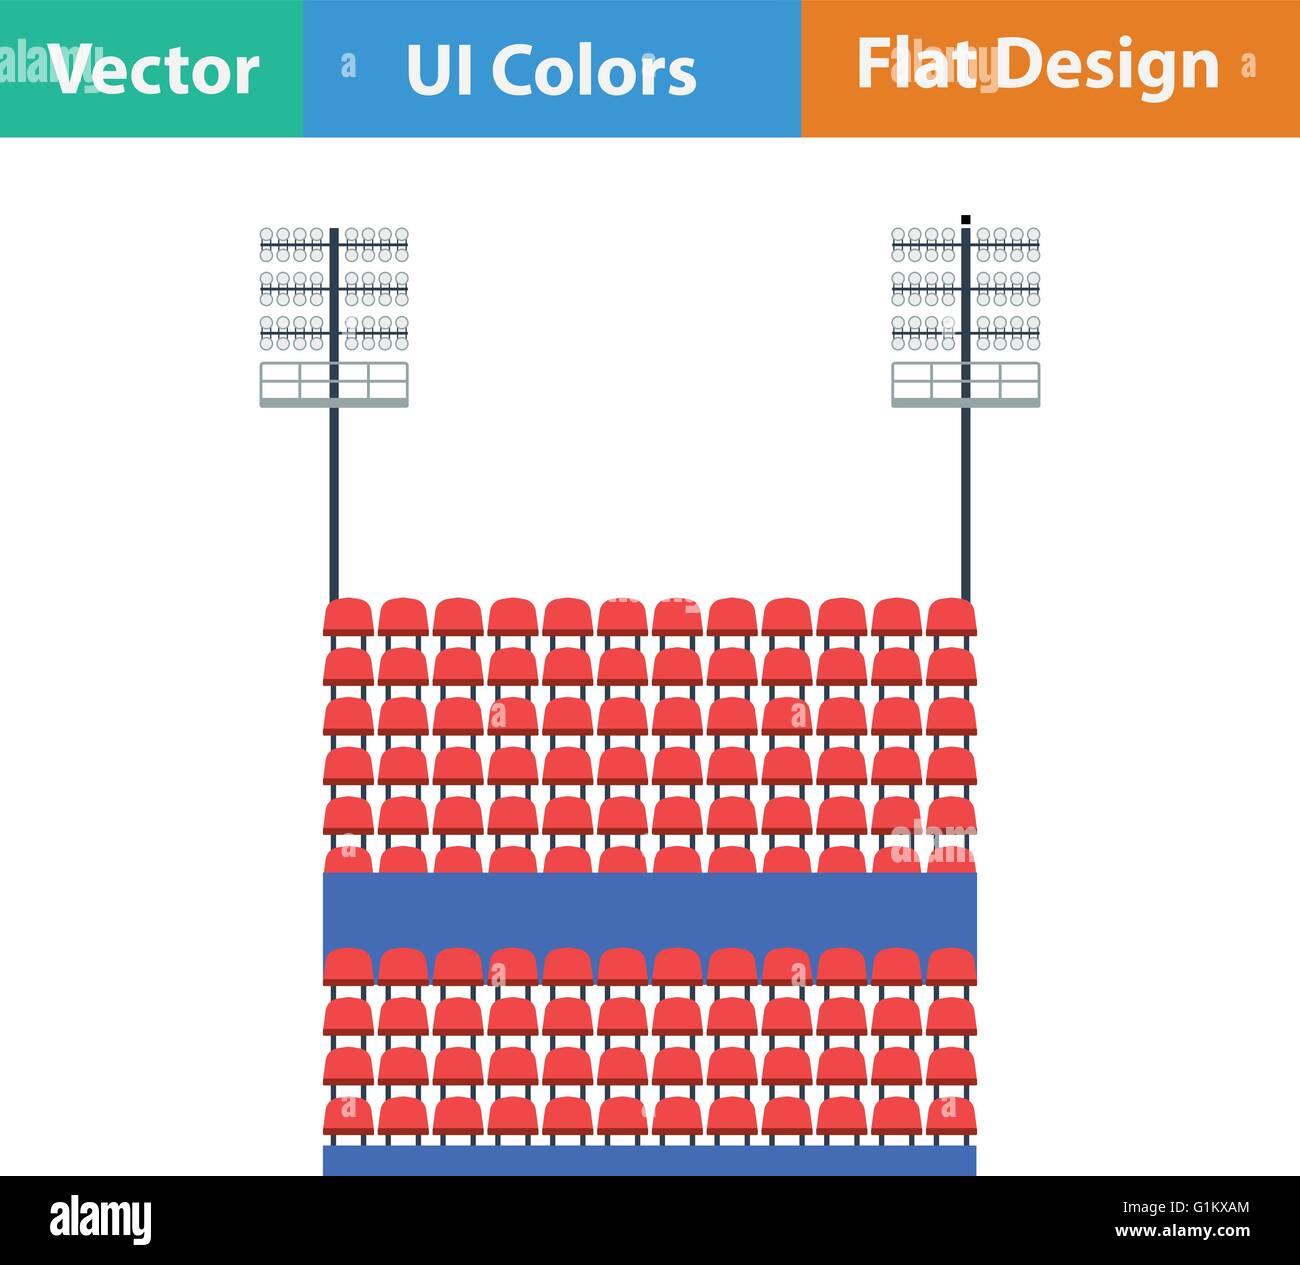 Stadium tribune with seats and light mast icon. Flat design in ui colors. Vector illustration. Stock Vector